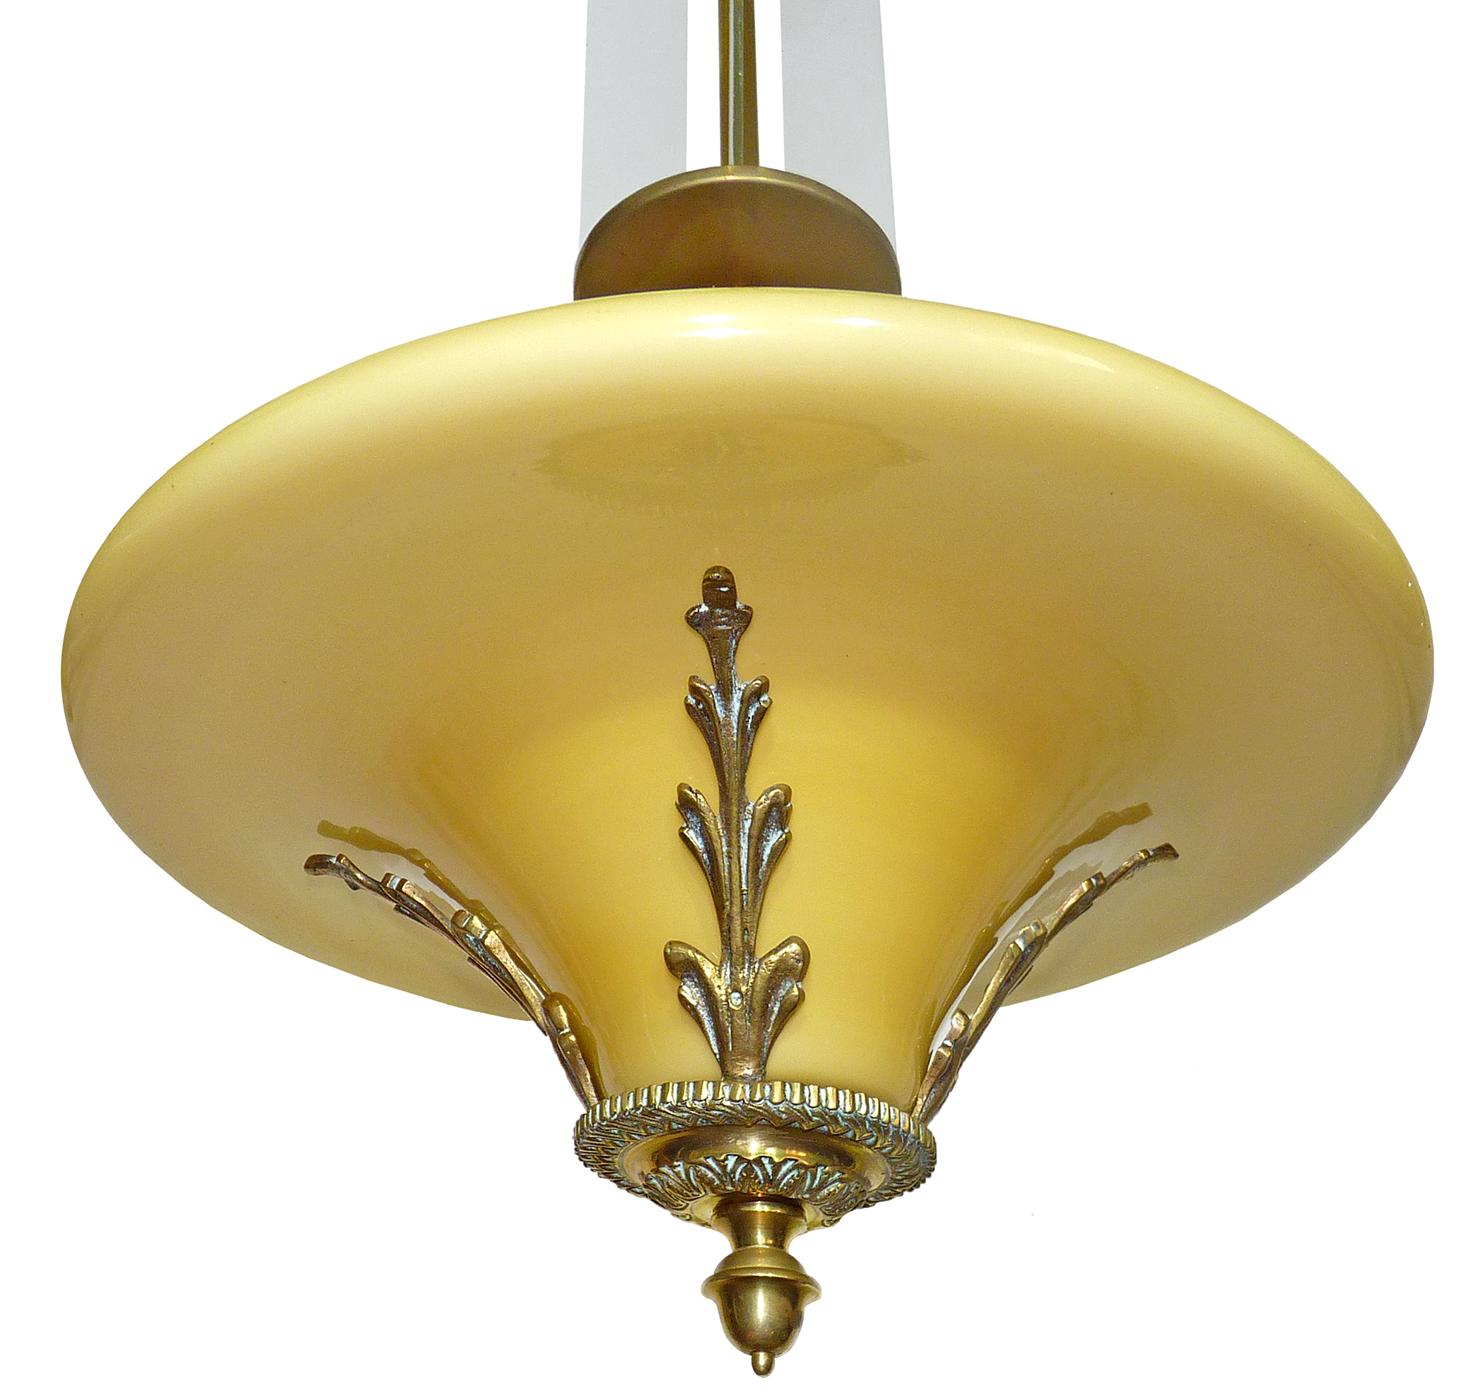 Antique Yellow French Art Deco or Art Nouveau bronze and opaline glass hanging chandelier in the style of petitot with four frosted glass strips.
Beautiful age patina
Measures:
Diameter 15 in / 36 cm
Height 36 in / 90 cm
Weight 7 lb. (3